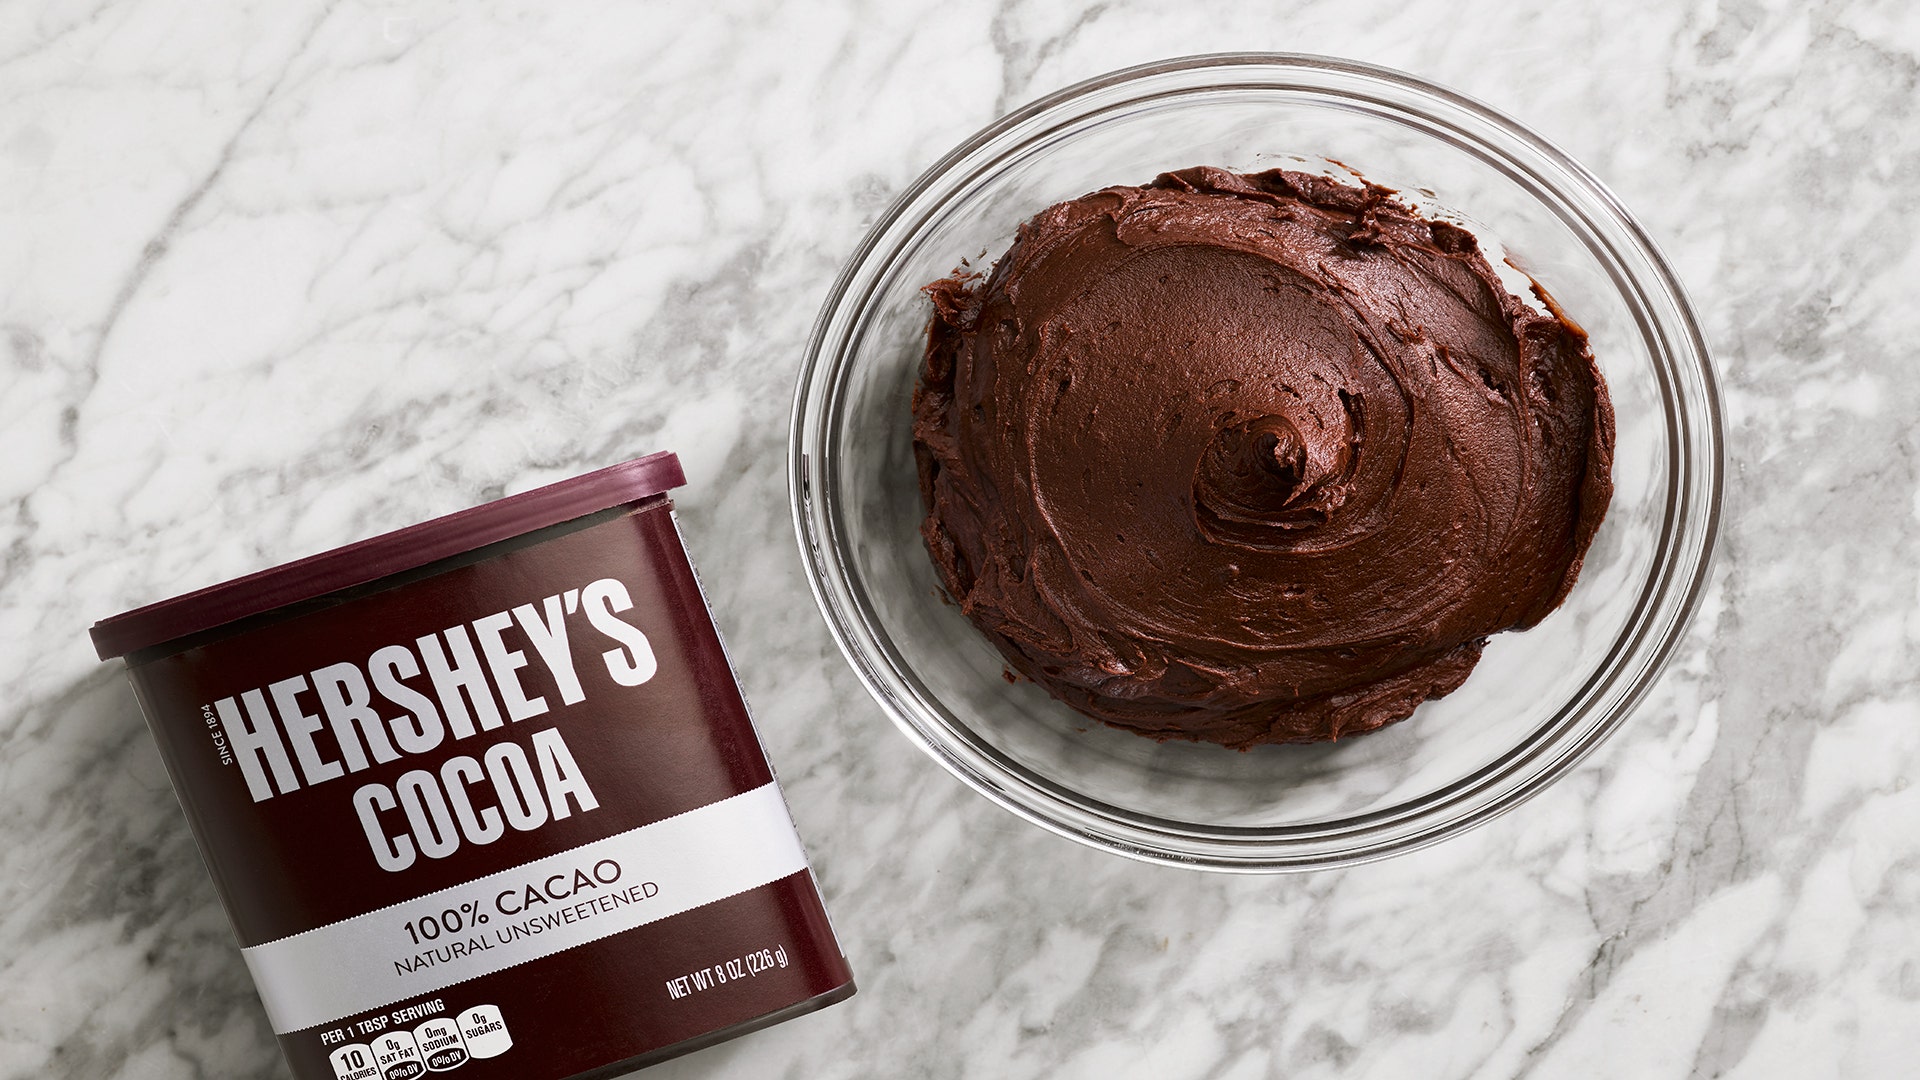 HERSHEY’S ‟Perfectly Chocolate” Chocolate Frosting